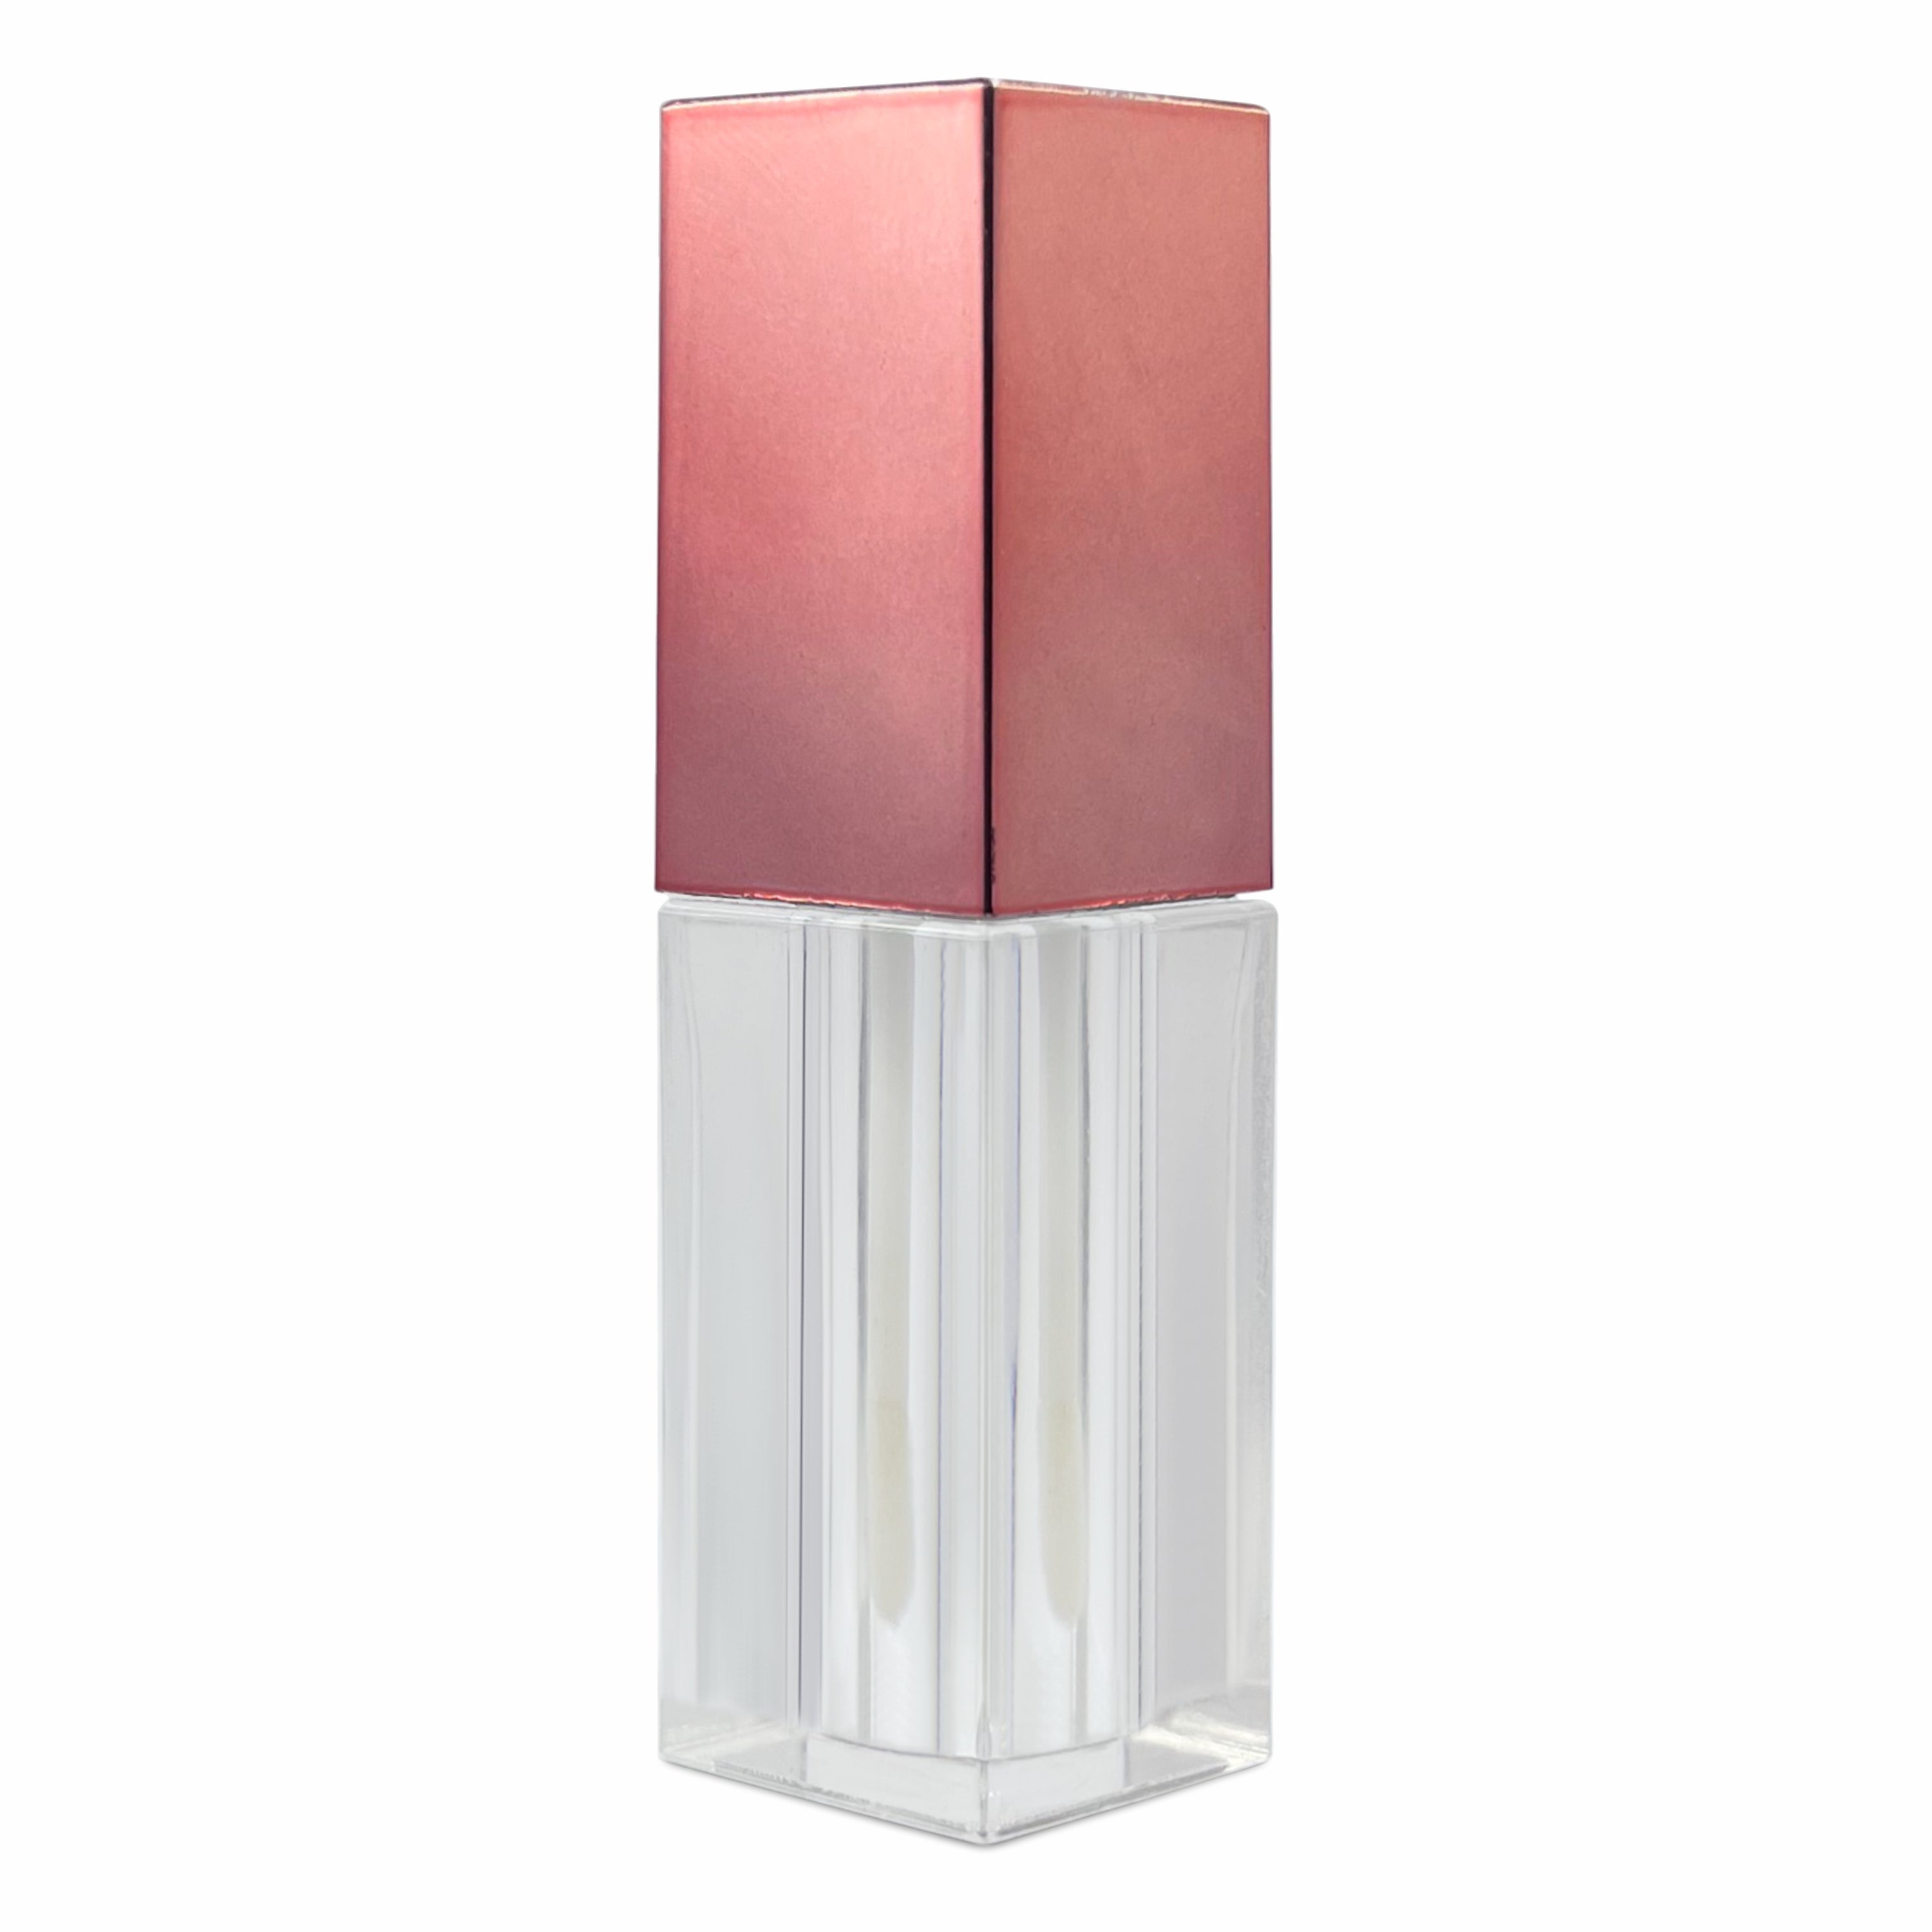 Lip Gloss/ Lip Stick Tube Square Shaped Bottle with Rose Gold Plated Square Cap- 5ml [ZMG78]